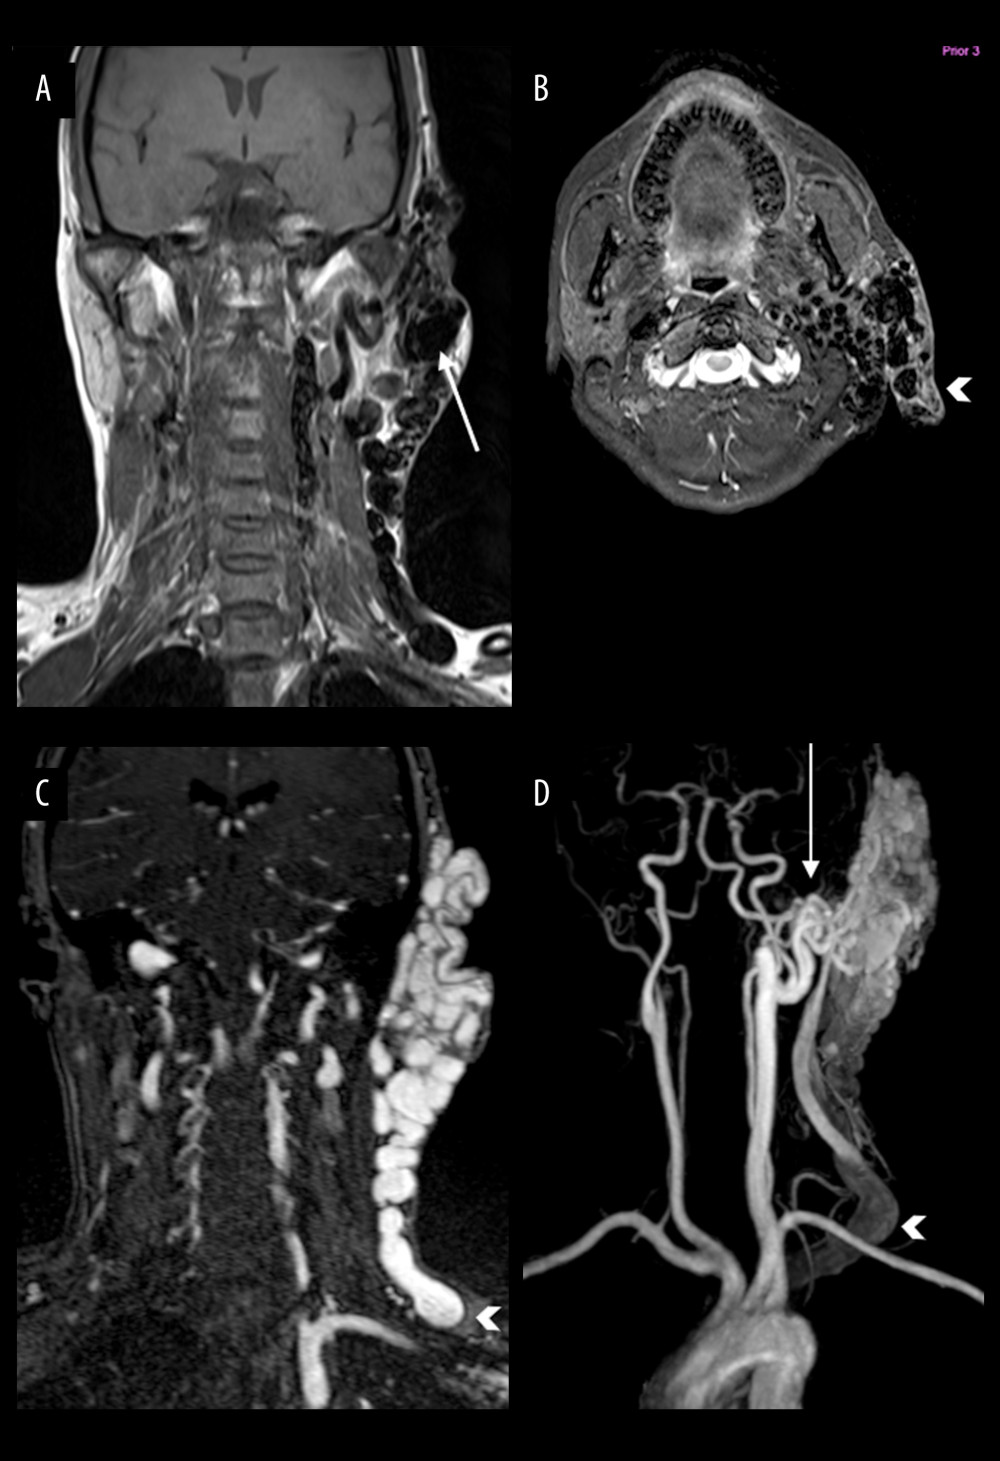 Coronal T1-weighted (A) and axial T2-weighted (B) MRI neck images of a 40-year-old woman show “bag of worms” or tangle of serpiginous “honeycomb” flow voids in the left parotid gland and left auricle (arrowhead, B) indicating an extensive high-flow arteriovenous malformation (AVM). An intranidal aneurysm (arrow, A) is present within the AVM. Coronal contrast-enhanced (CE) MRA image (C) shows the dilated and serpiginous vessels within the left parotid and auricular AVM and dilated veins draining blood into the left external jugular vein (arrowhead). Maximum-intensity projection of CE-MRA image (D) shows the left posterior auricular artery (arrow), one of the main arterial blood supplies to the AVM, along with the superficial temporal artery. These 2 are branches of the left external carotid artery (arrow). The AVM drains predominantly into a dilated and serpiginous left external jugular vein (arrowhead).